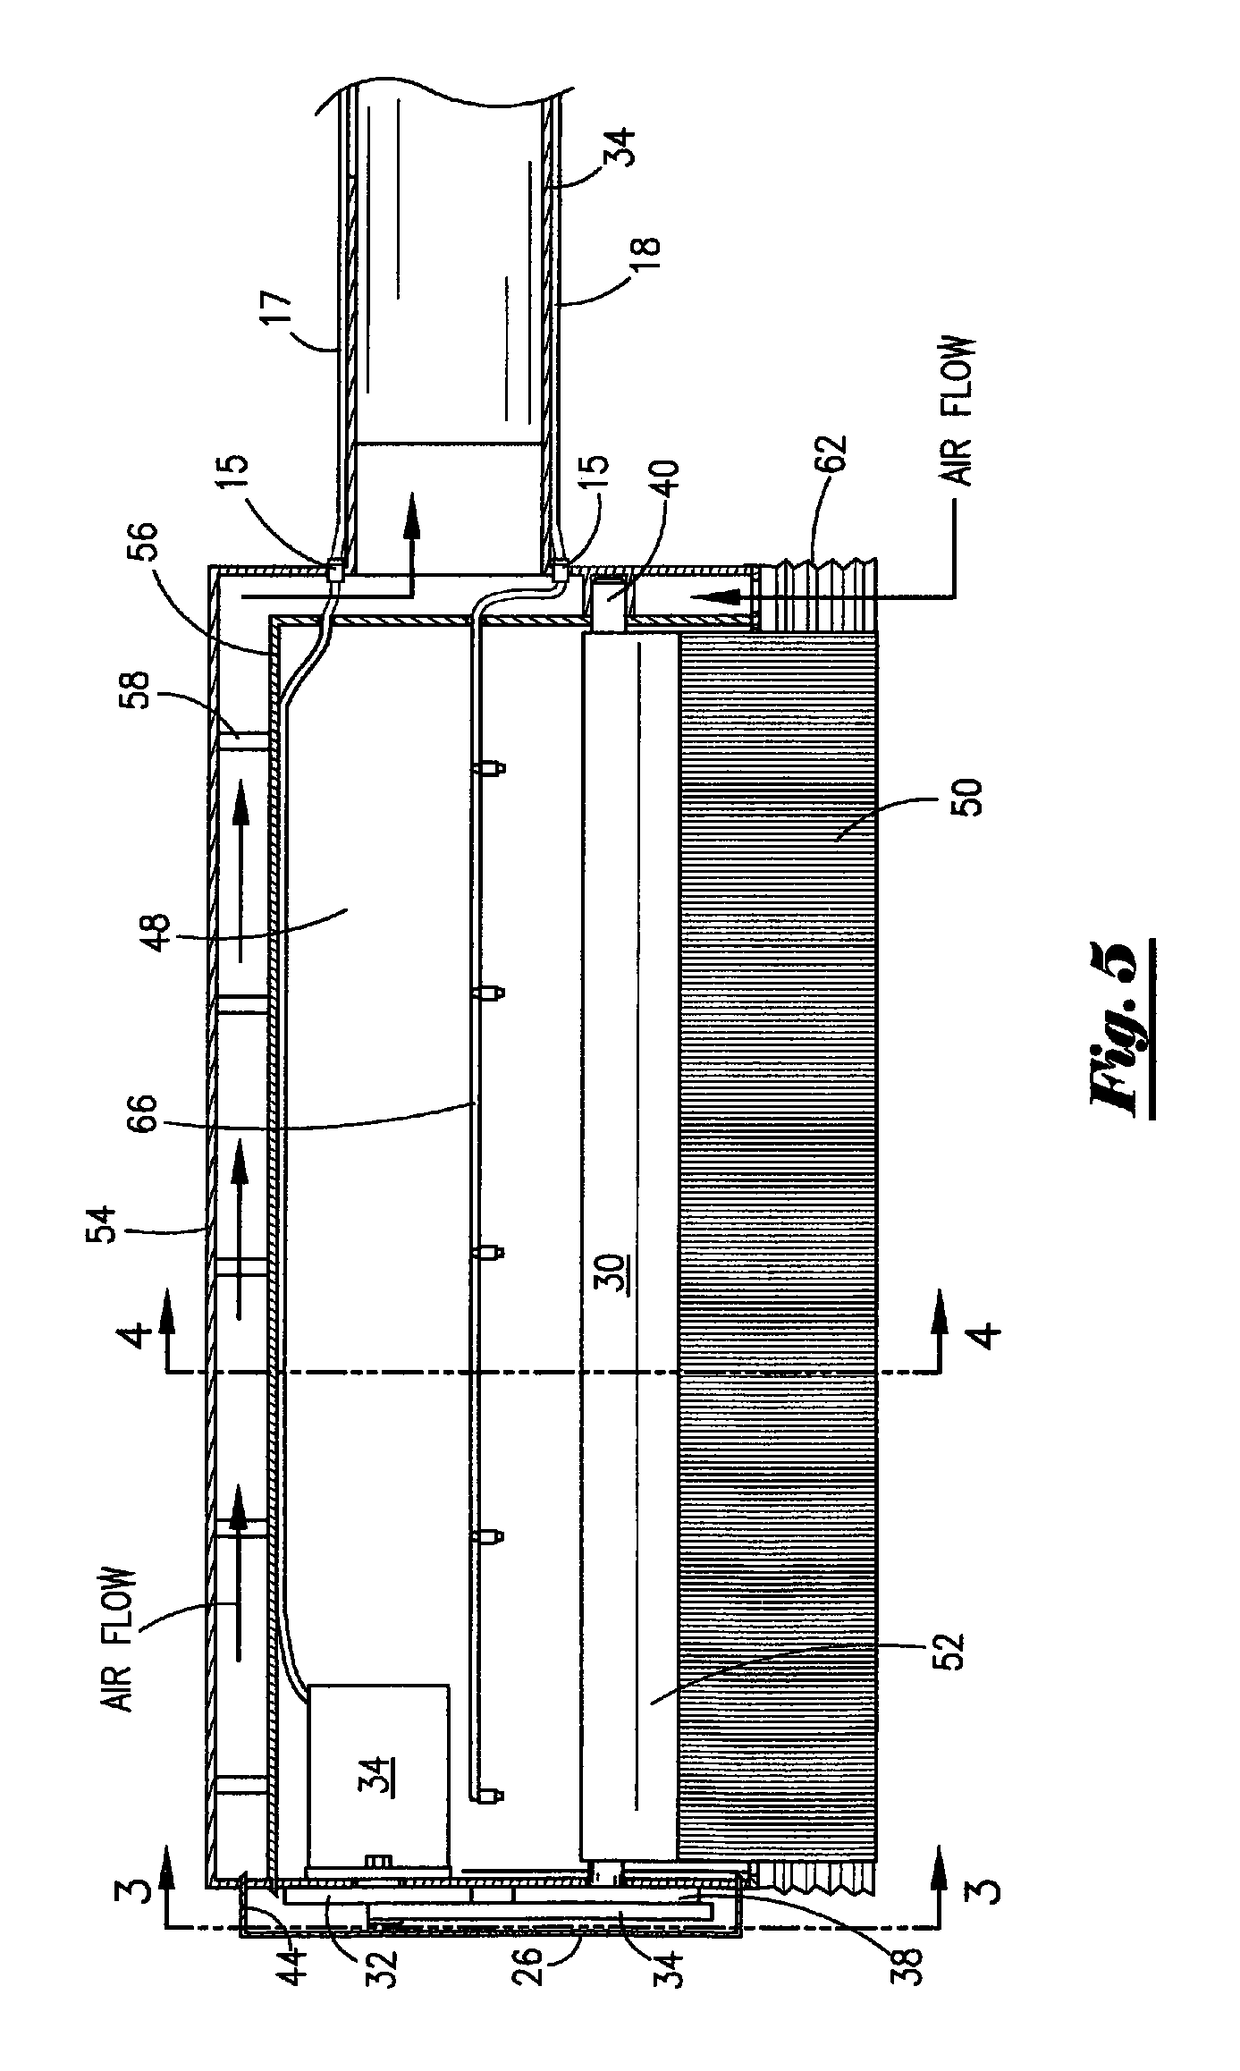 Method and apparatus for cleaning air conditioner evaporator coils